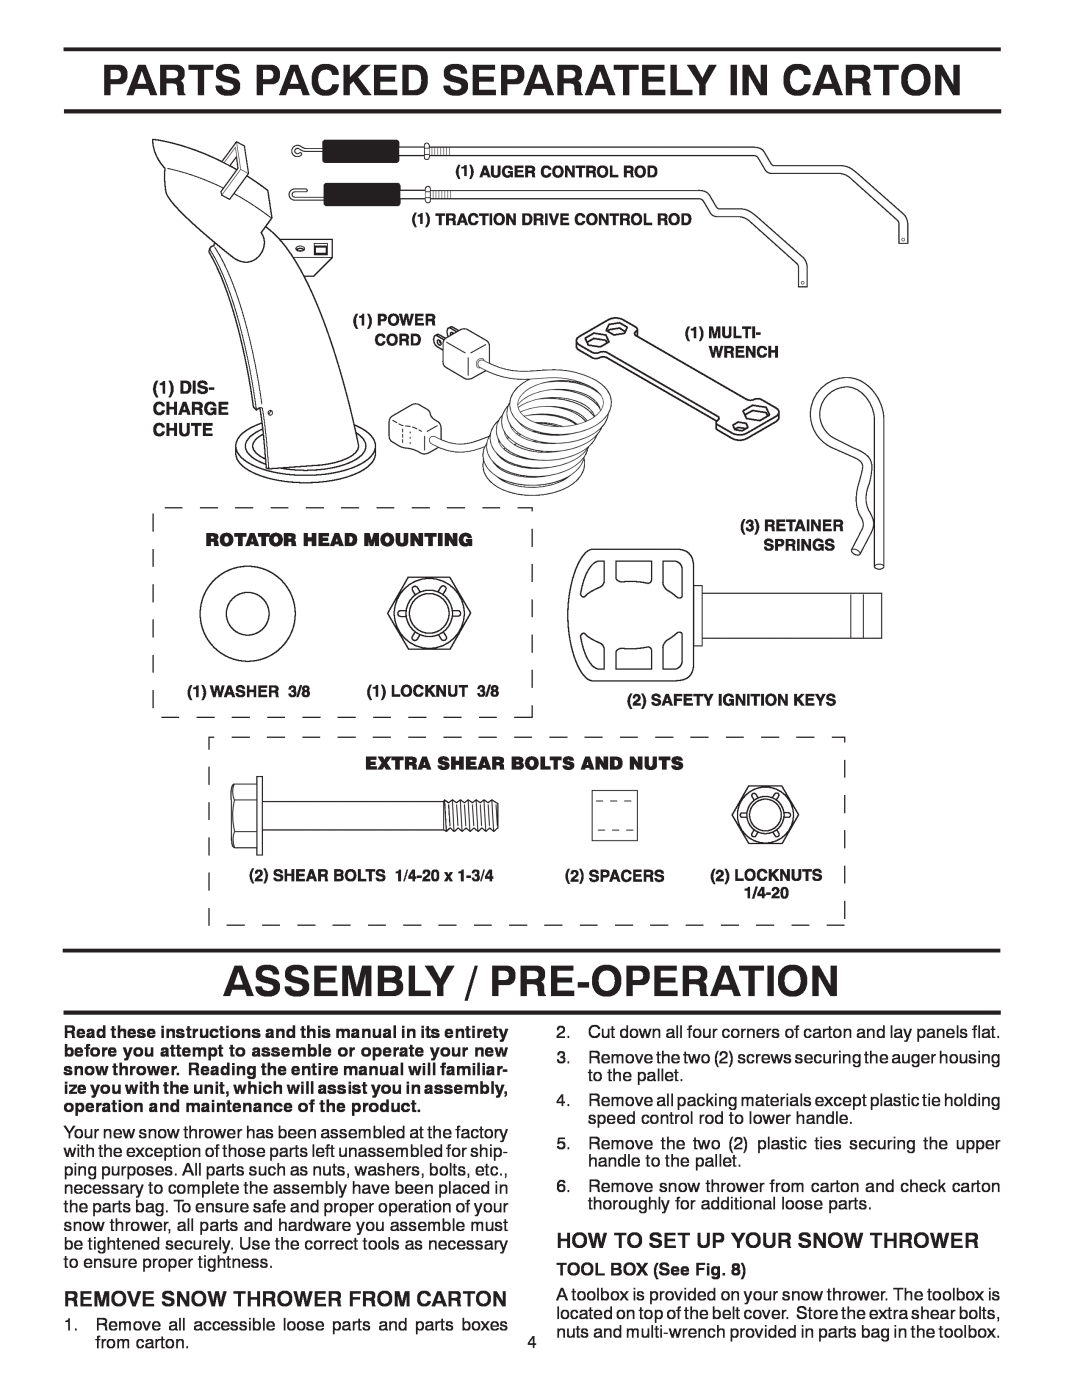 Poulan 415136 owner manual Parts Packed Separately In Carton Assembly / Pre-Operation, How To Set Up Your Snow Thrower 